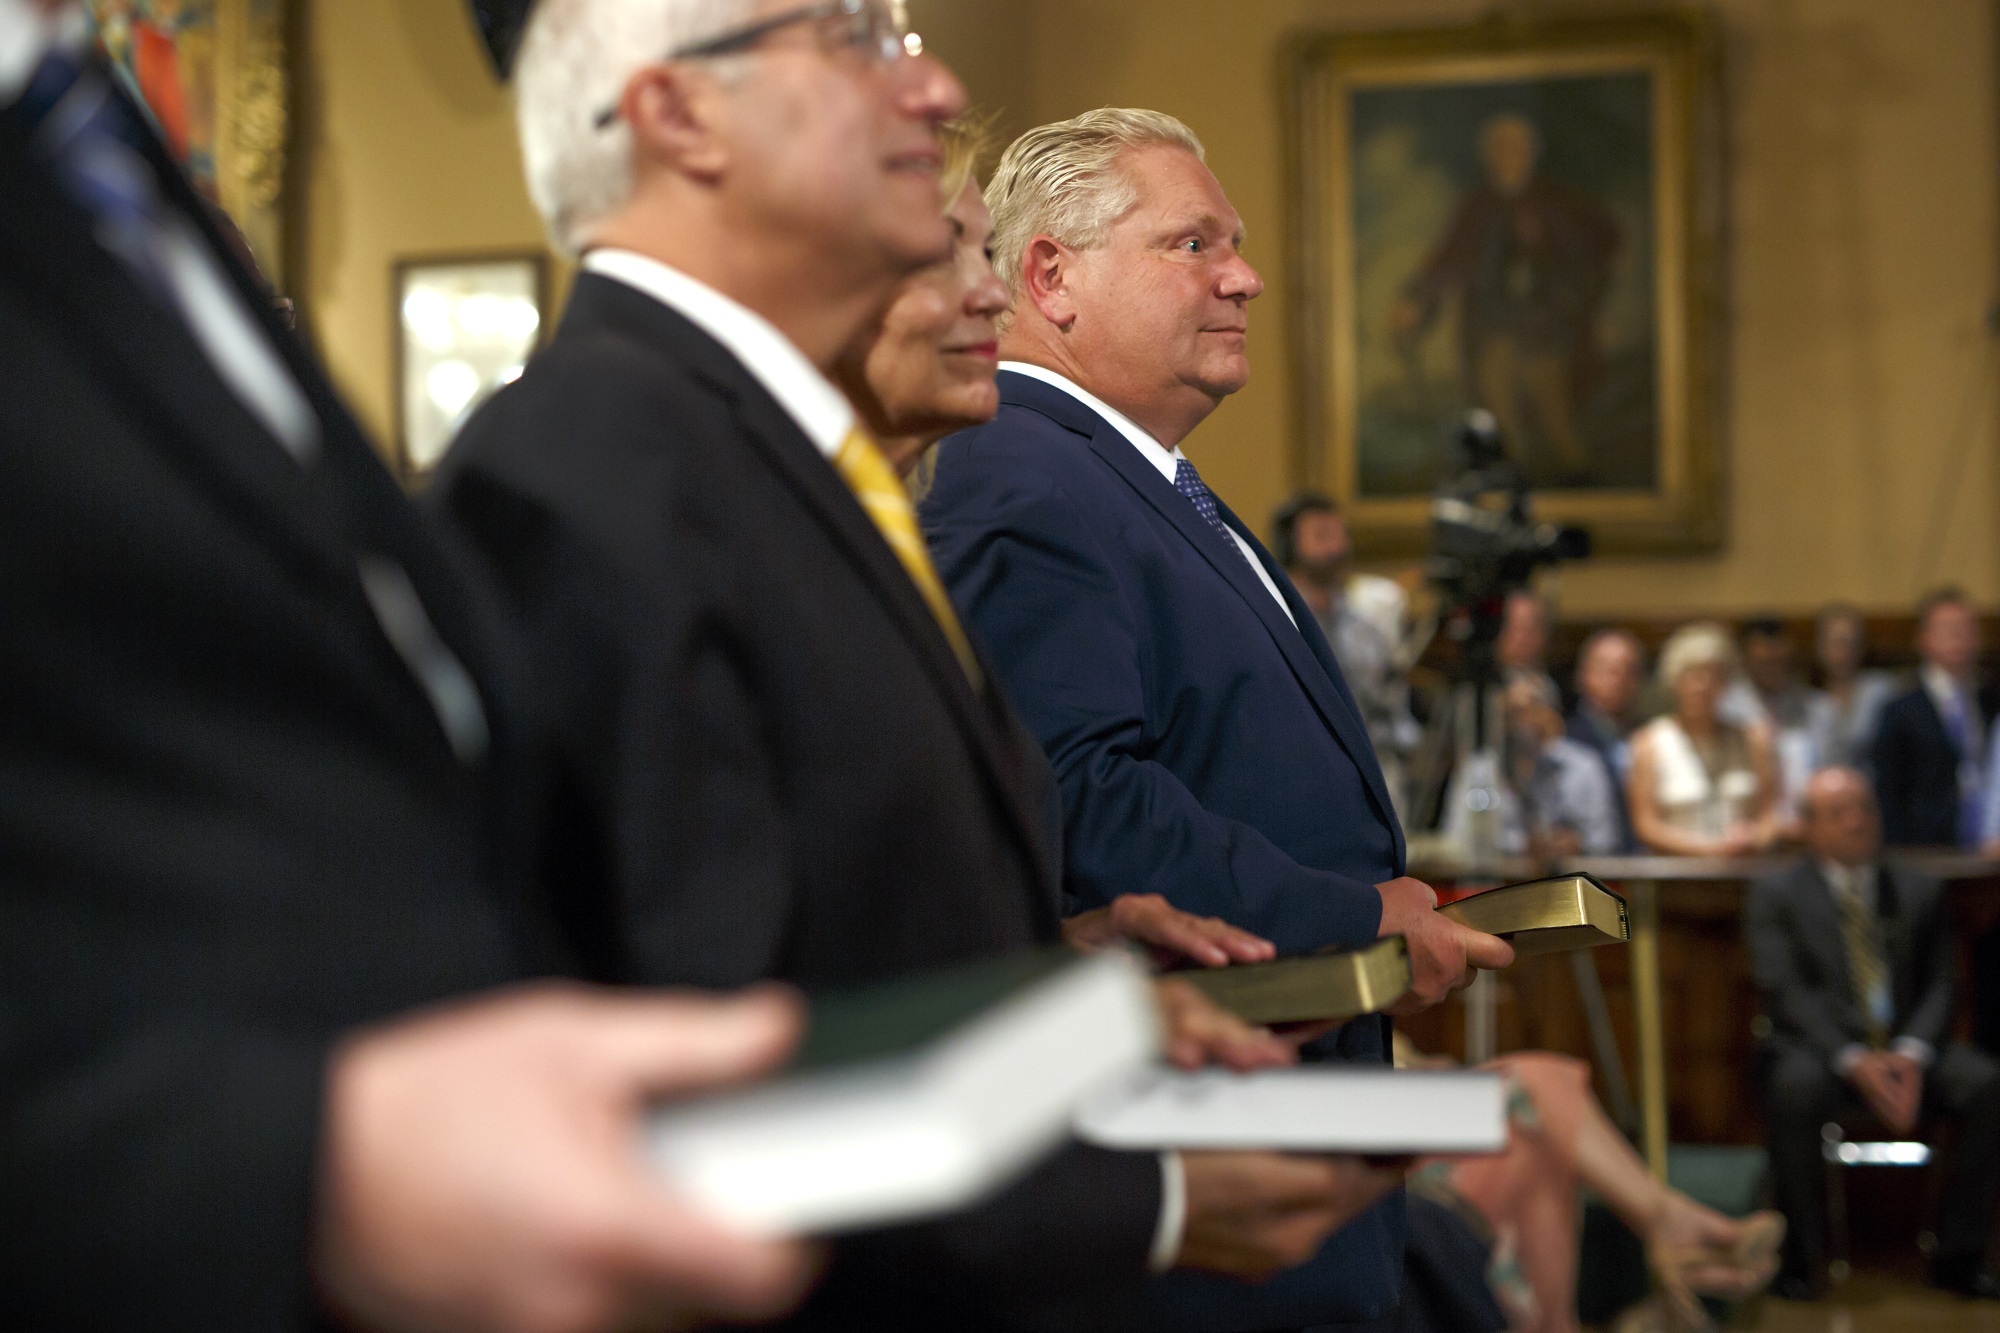 Ontario Premier Doug Ford, right, and his cabinet are sworn in at Queen’s Park in Toronto on June 29, 2018.&nbsp;